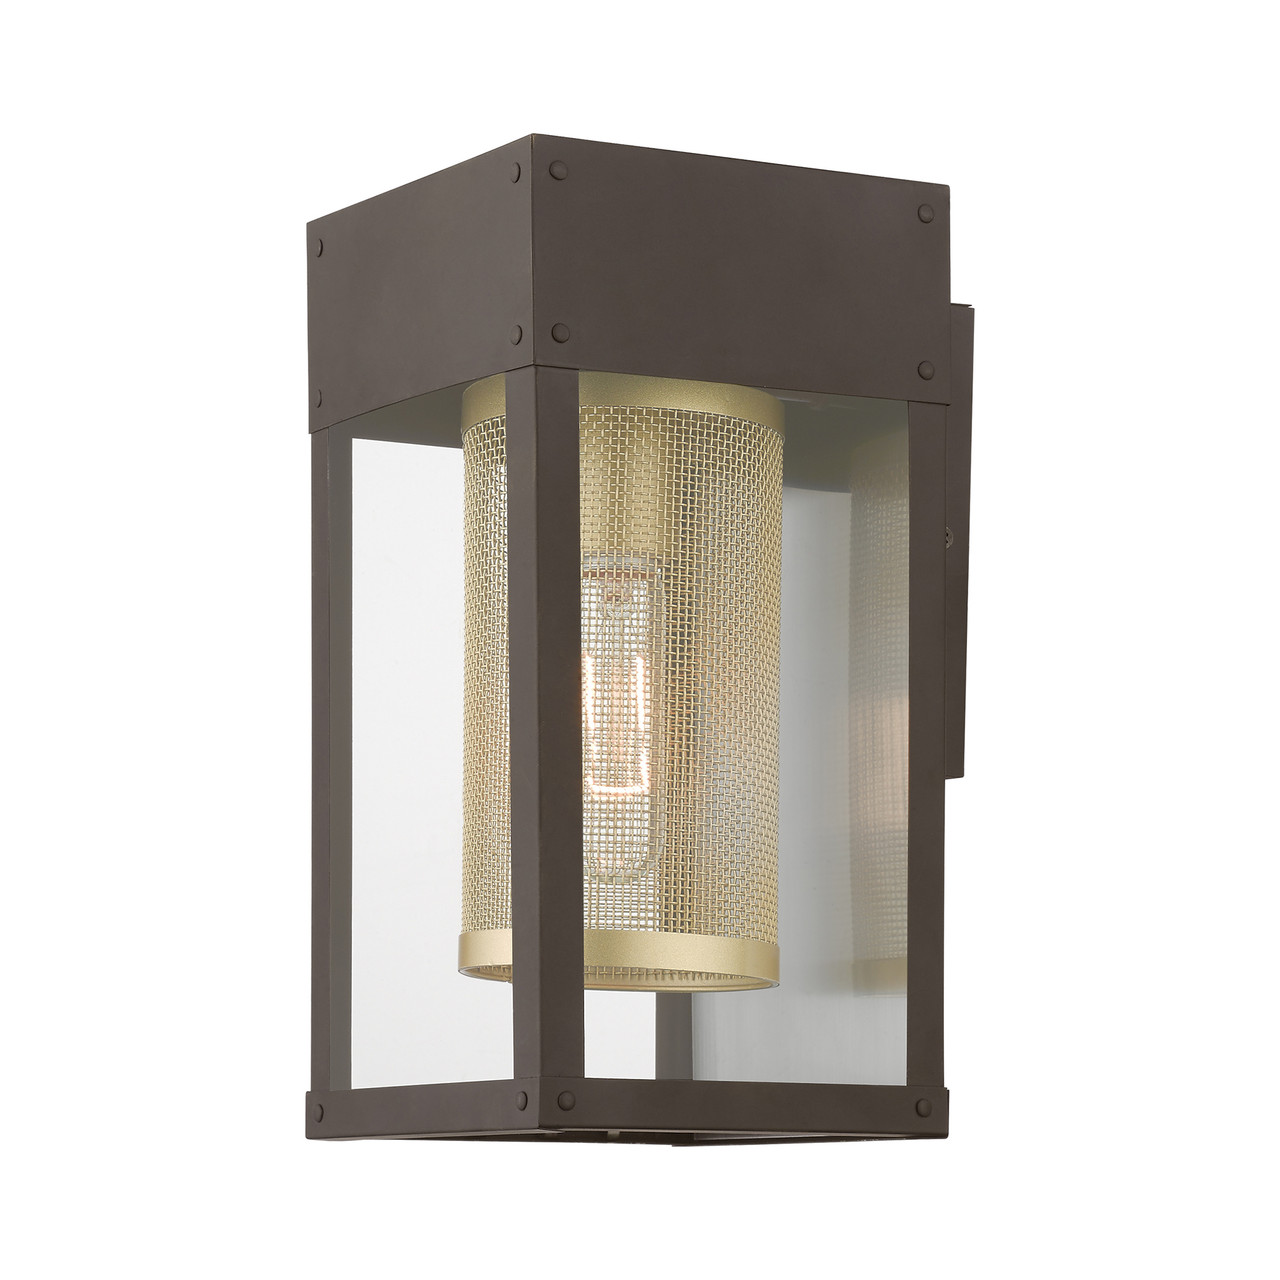 LIVEX LIGHTING 20761-07 1 Light Bronze with Soft Gold Candle and Brushed Nickel Stainless Steel Reflector Outdoor Wall Lantern